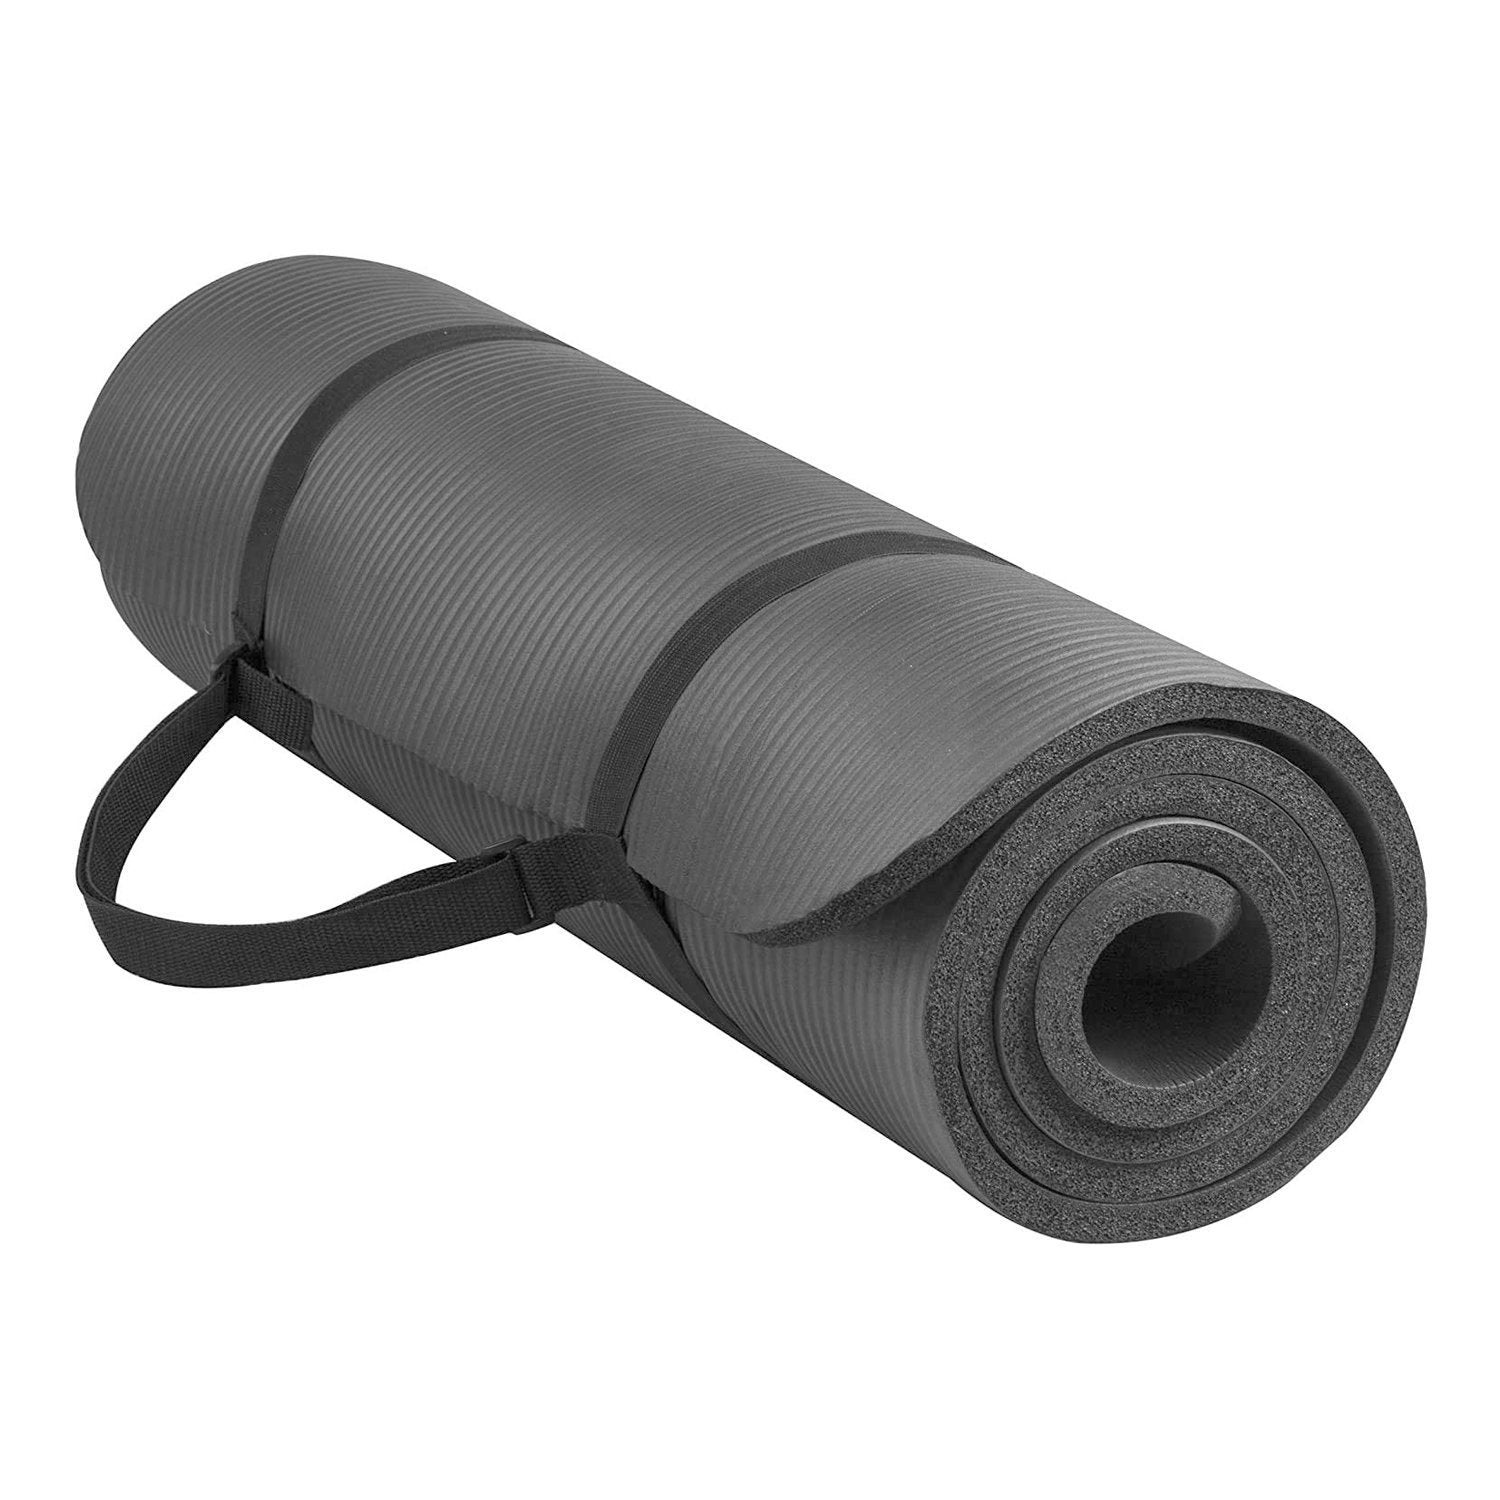 Extra Thick Exercise Yoga Mat - Black